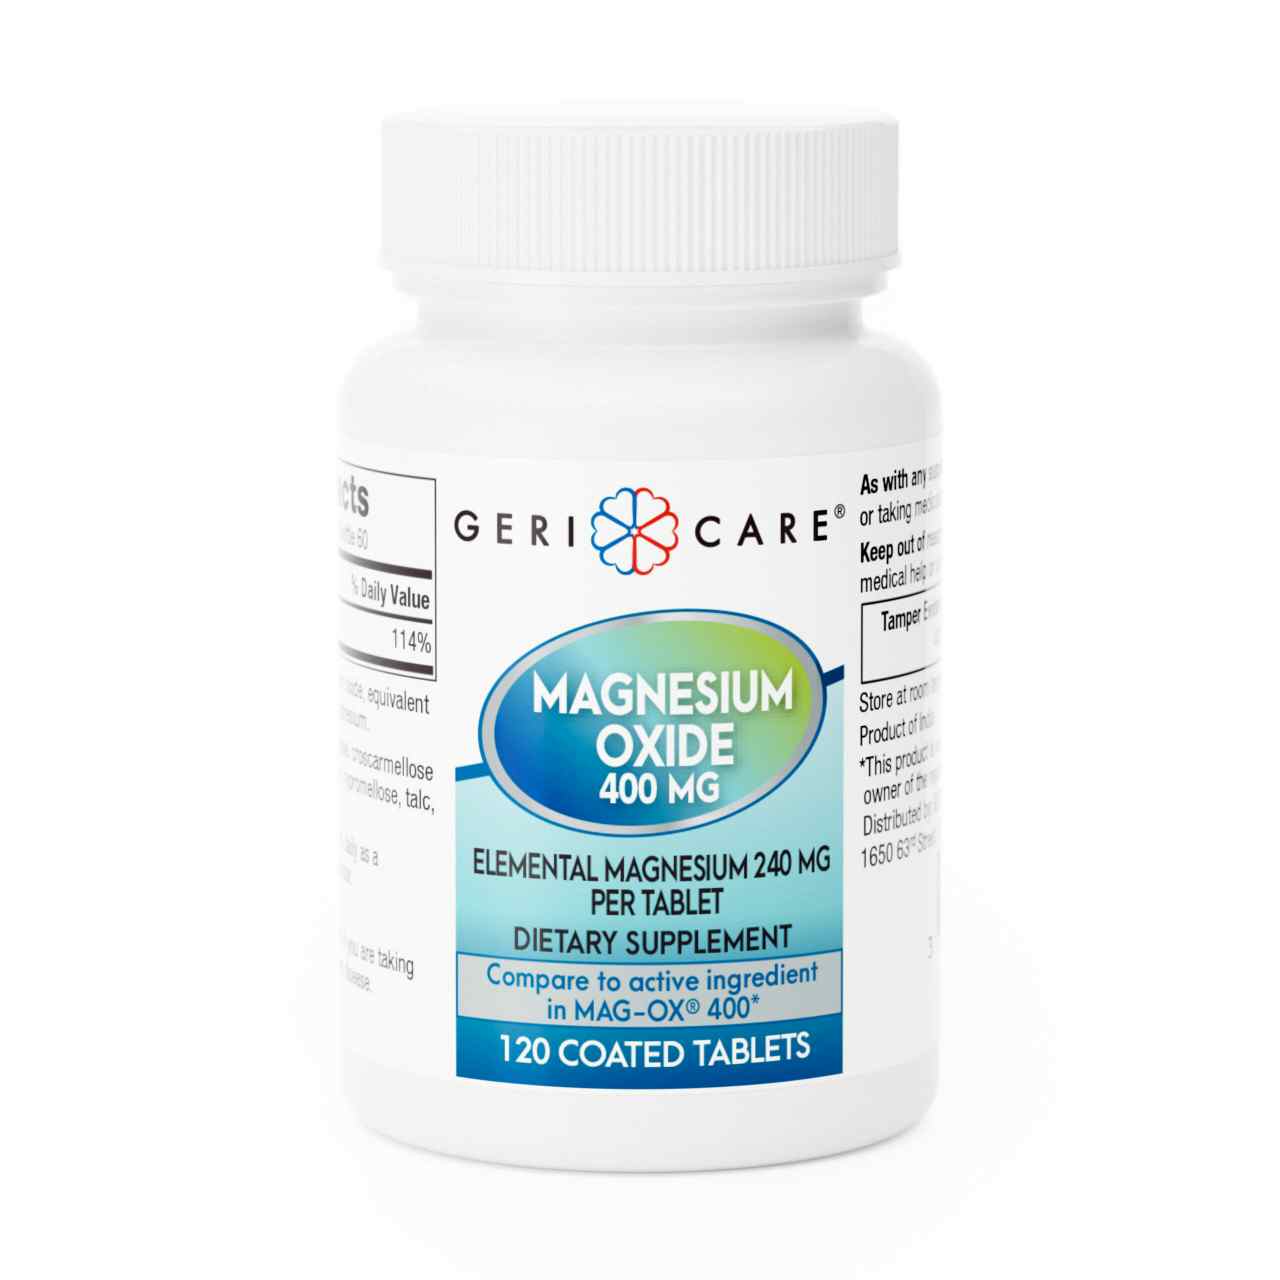 Geri-Care Magnesium Oxide Dietary Supplement, 400 mg, 120 Tablets